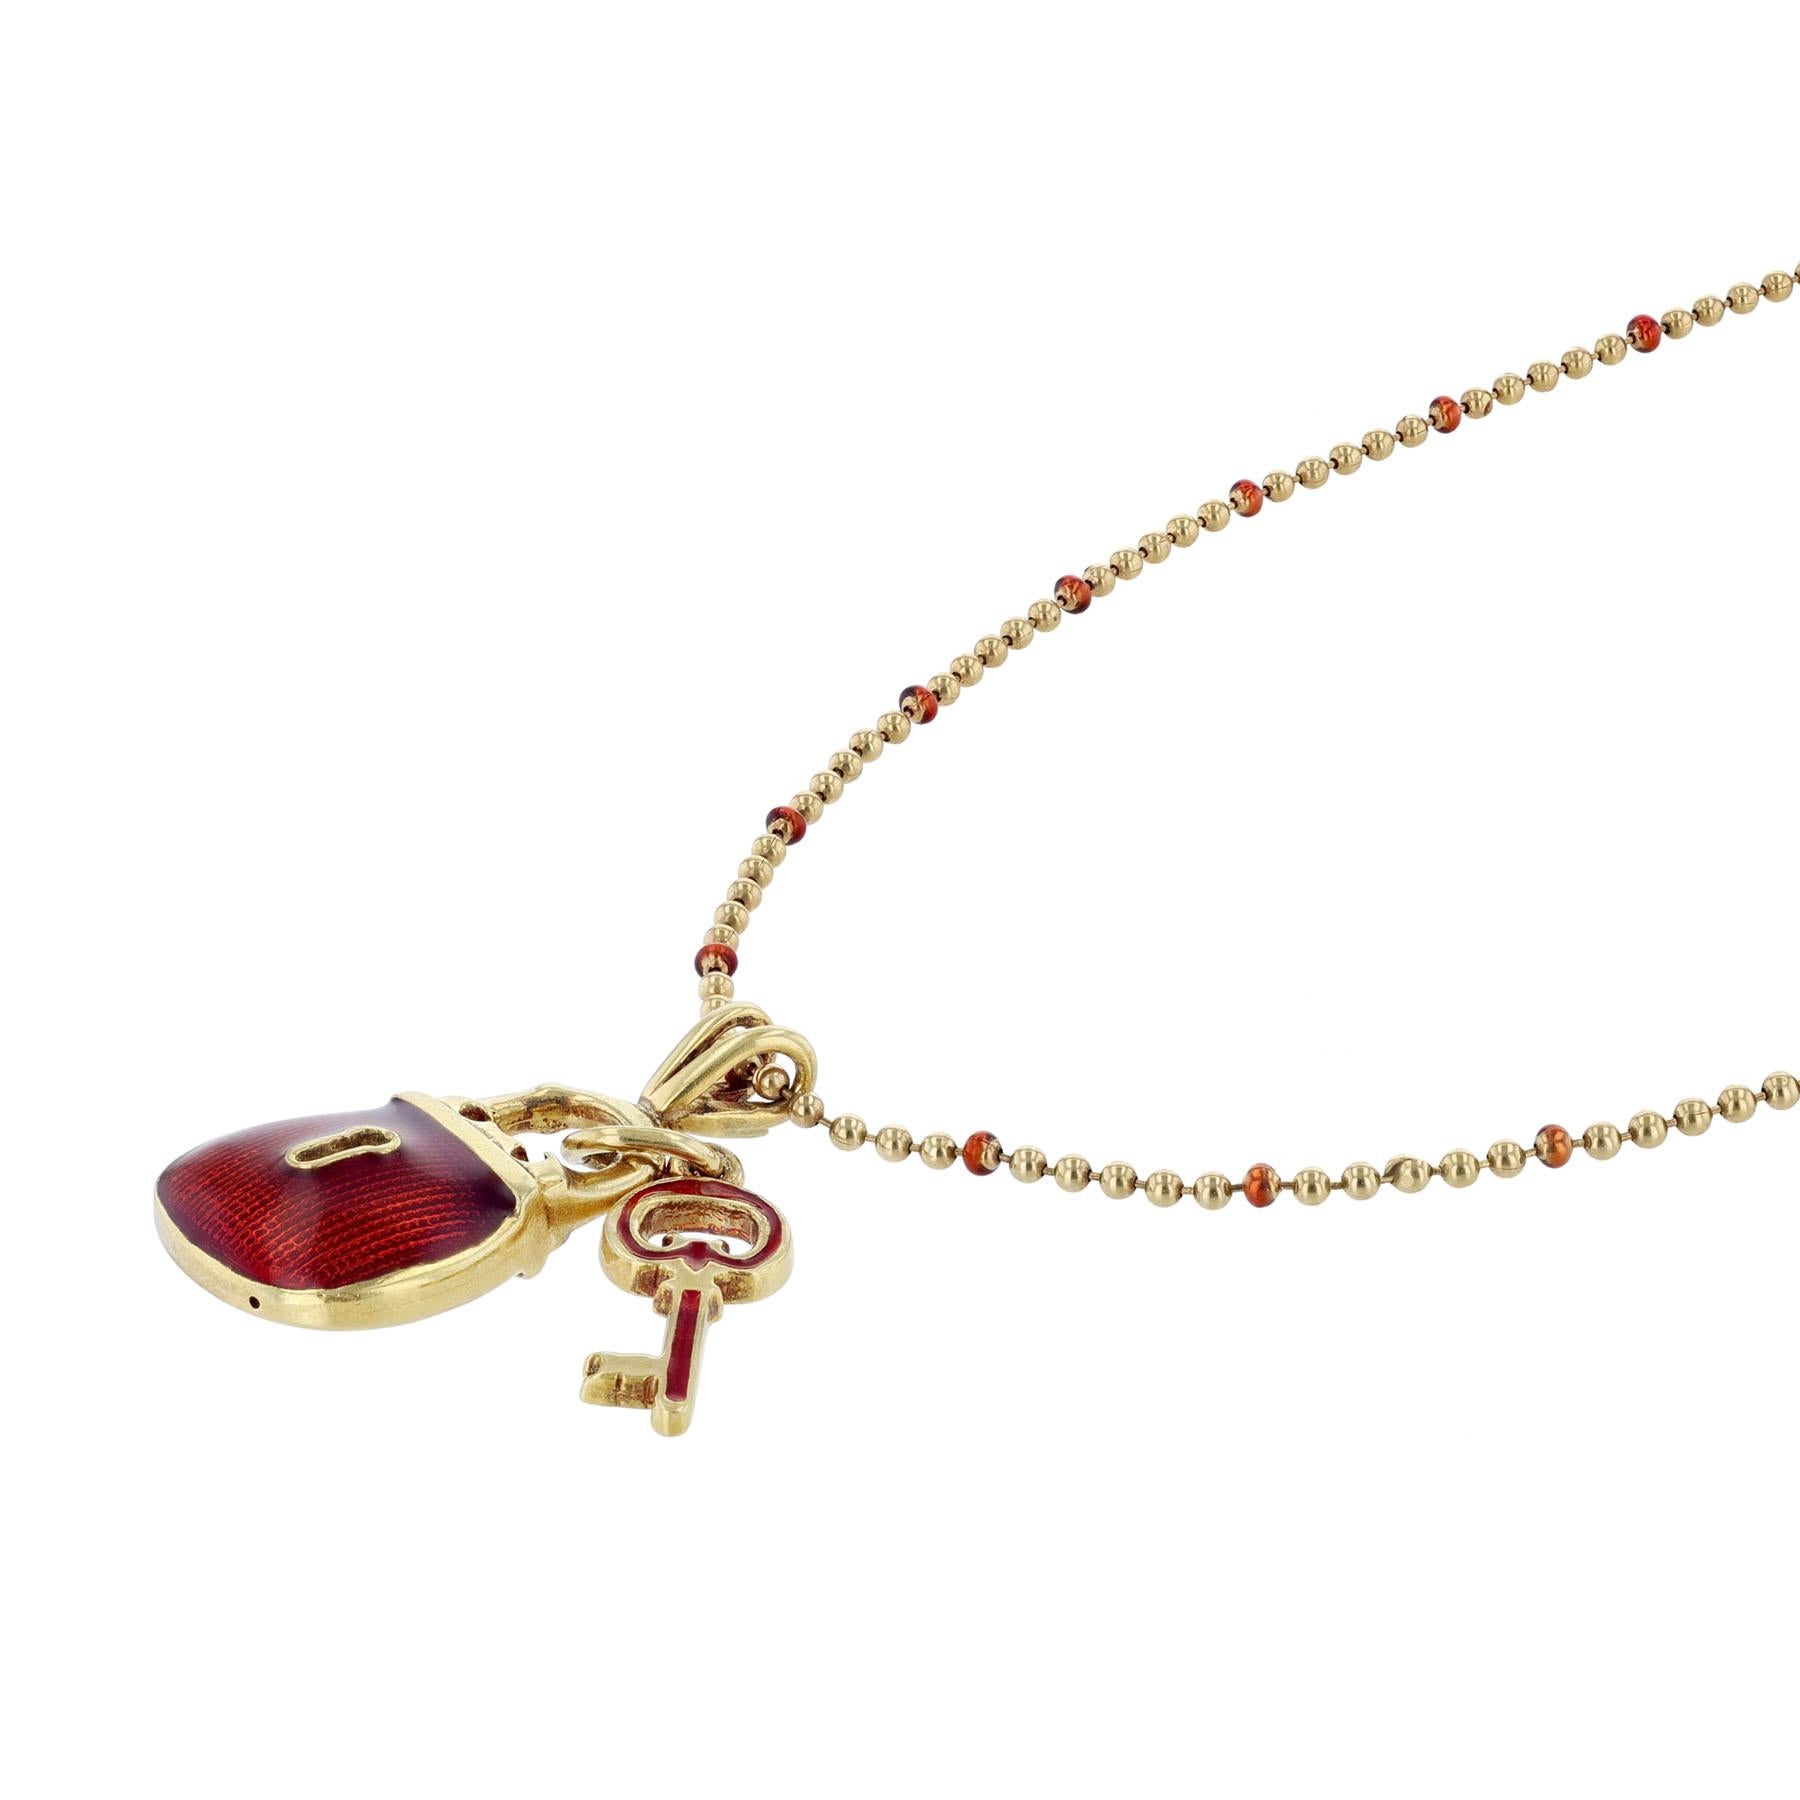 This necklace is made in 18K yellow gold and red enamel. It features a lock and key pendant pendants.